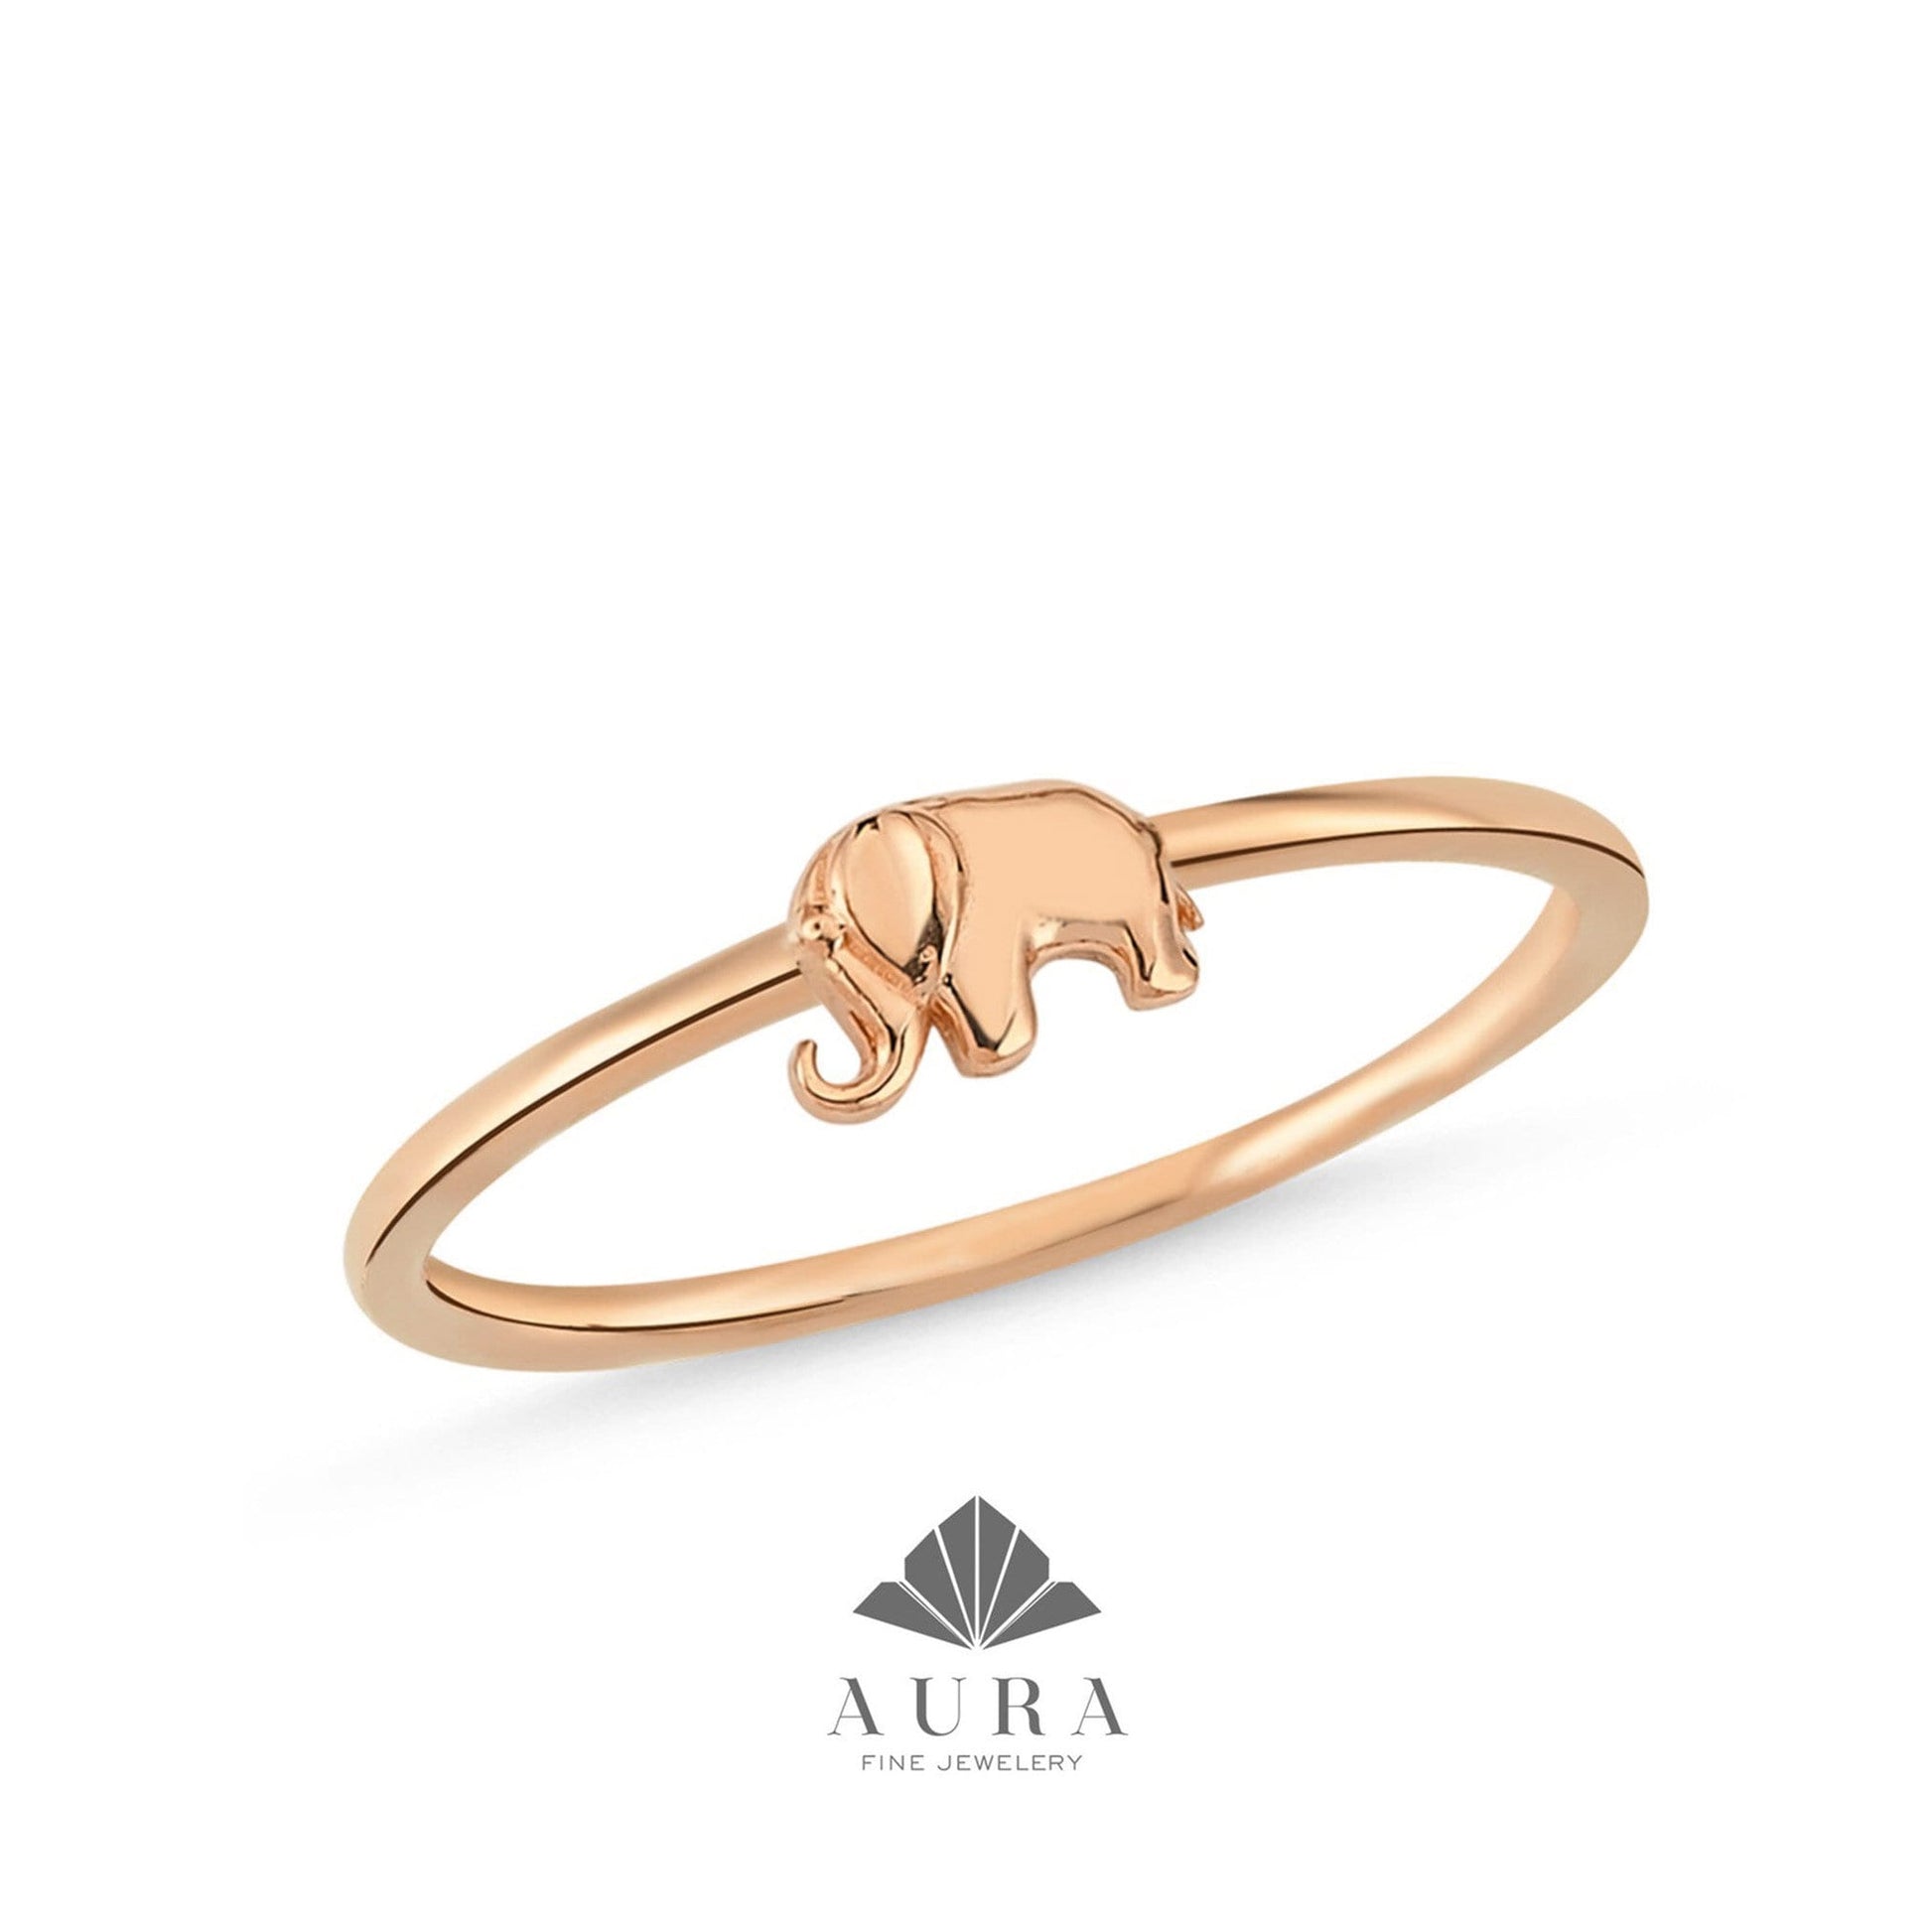 14K Gold Elephant Ring, Stacking Dainty Band, Animal Gold Ring, Dainty Luck Symbol, Handmade Statement Ring, Unique Pinky Ring